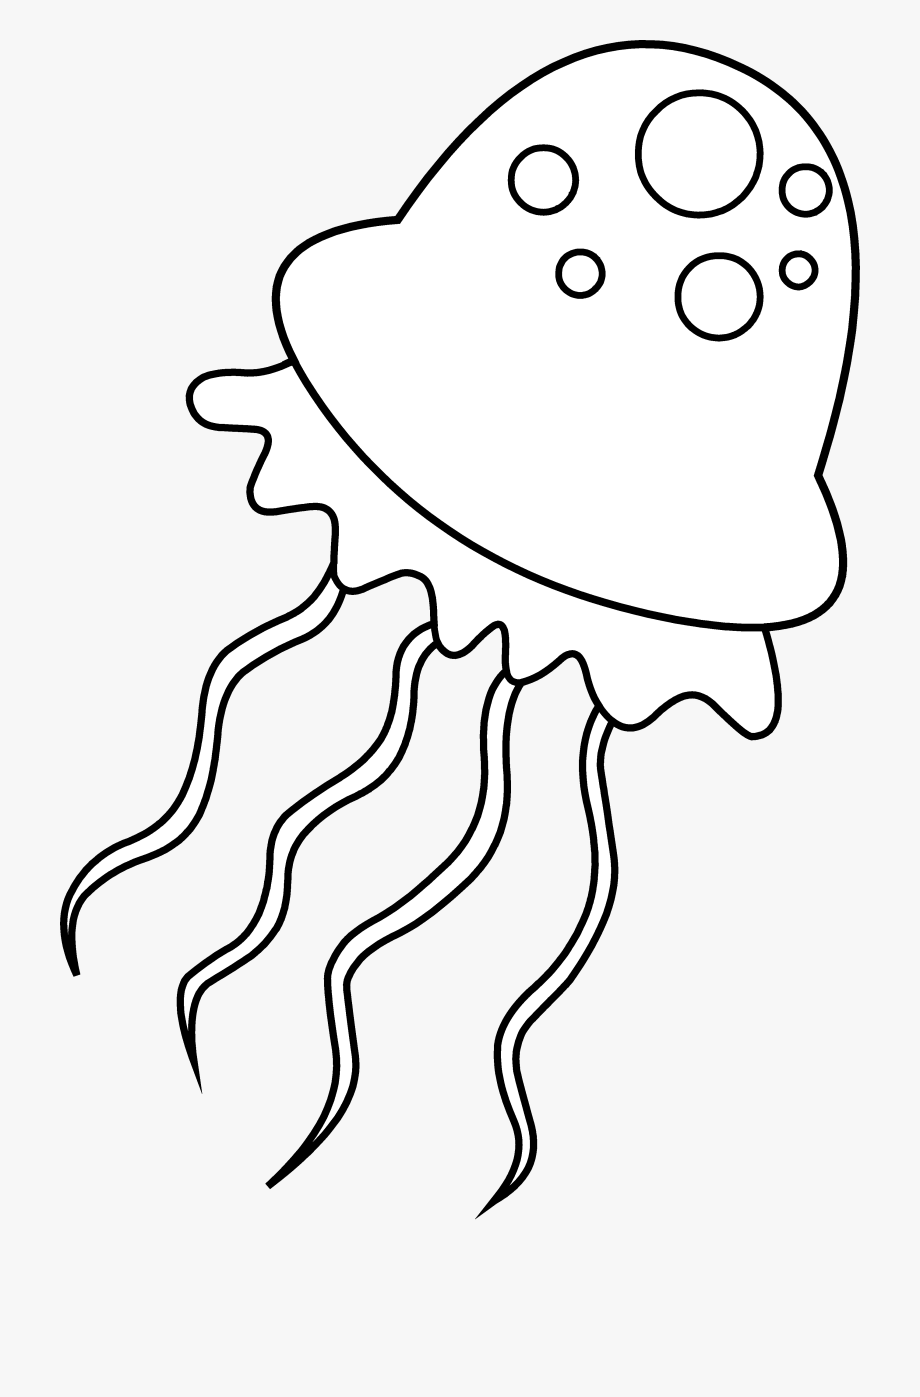 Jellyfish coloring page.